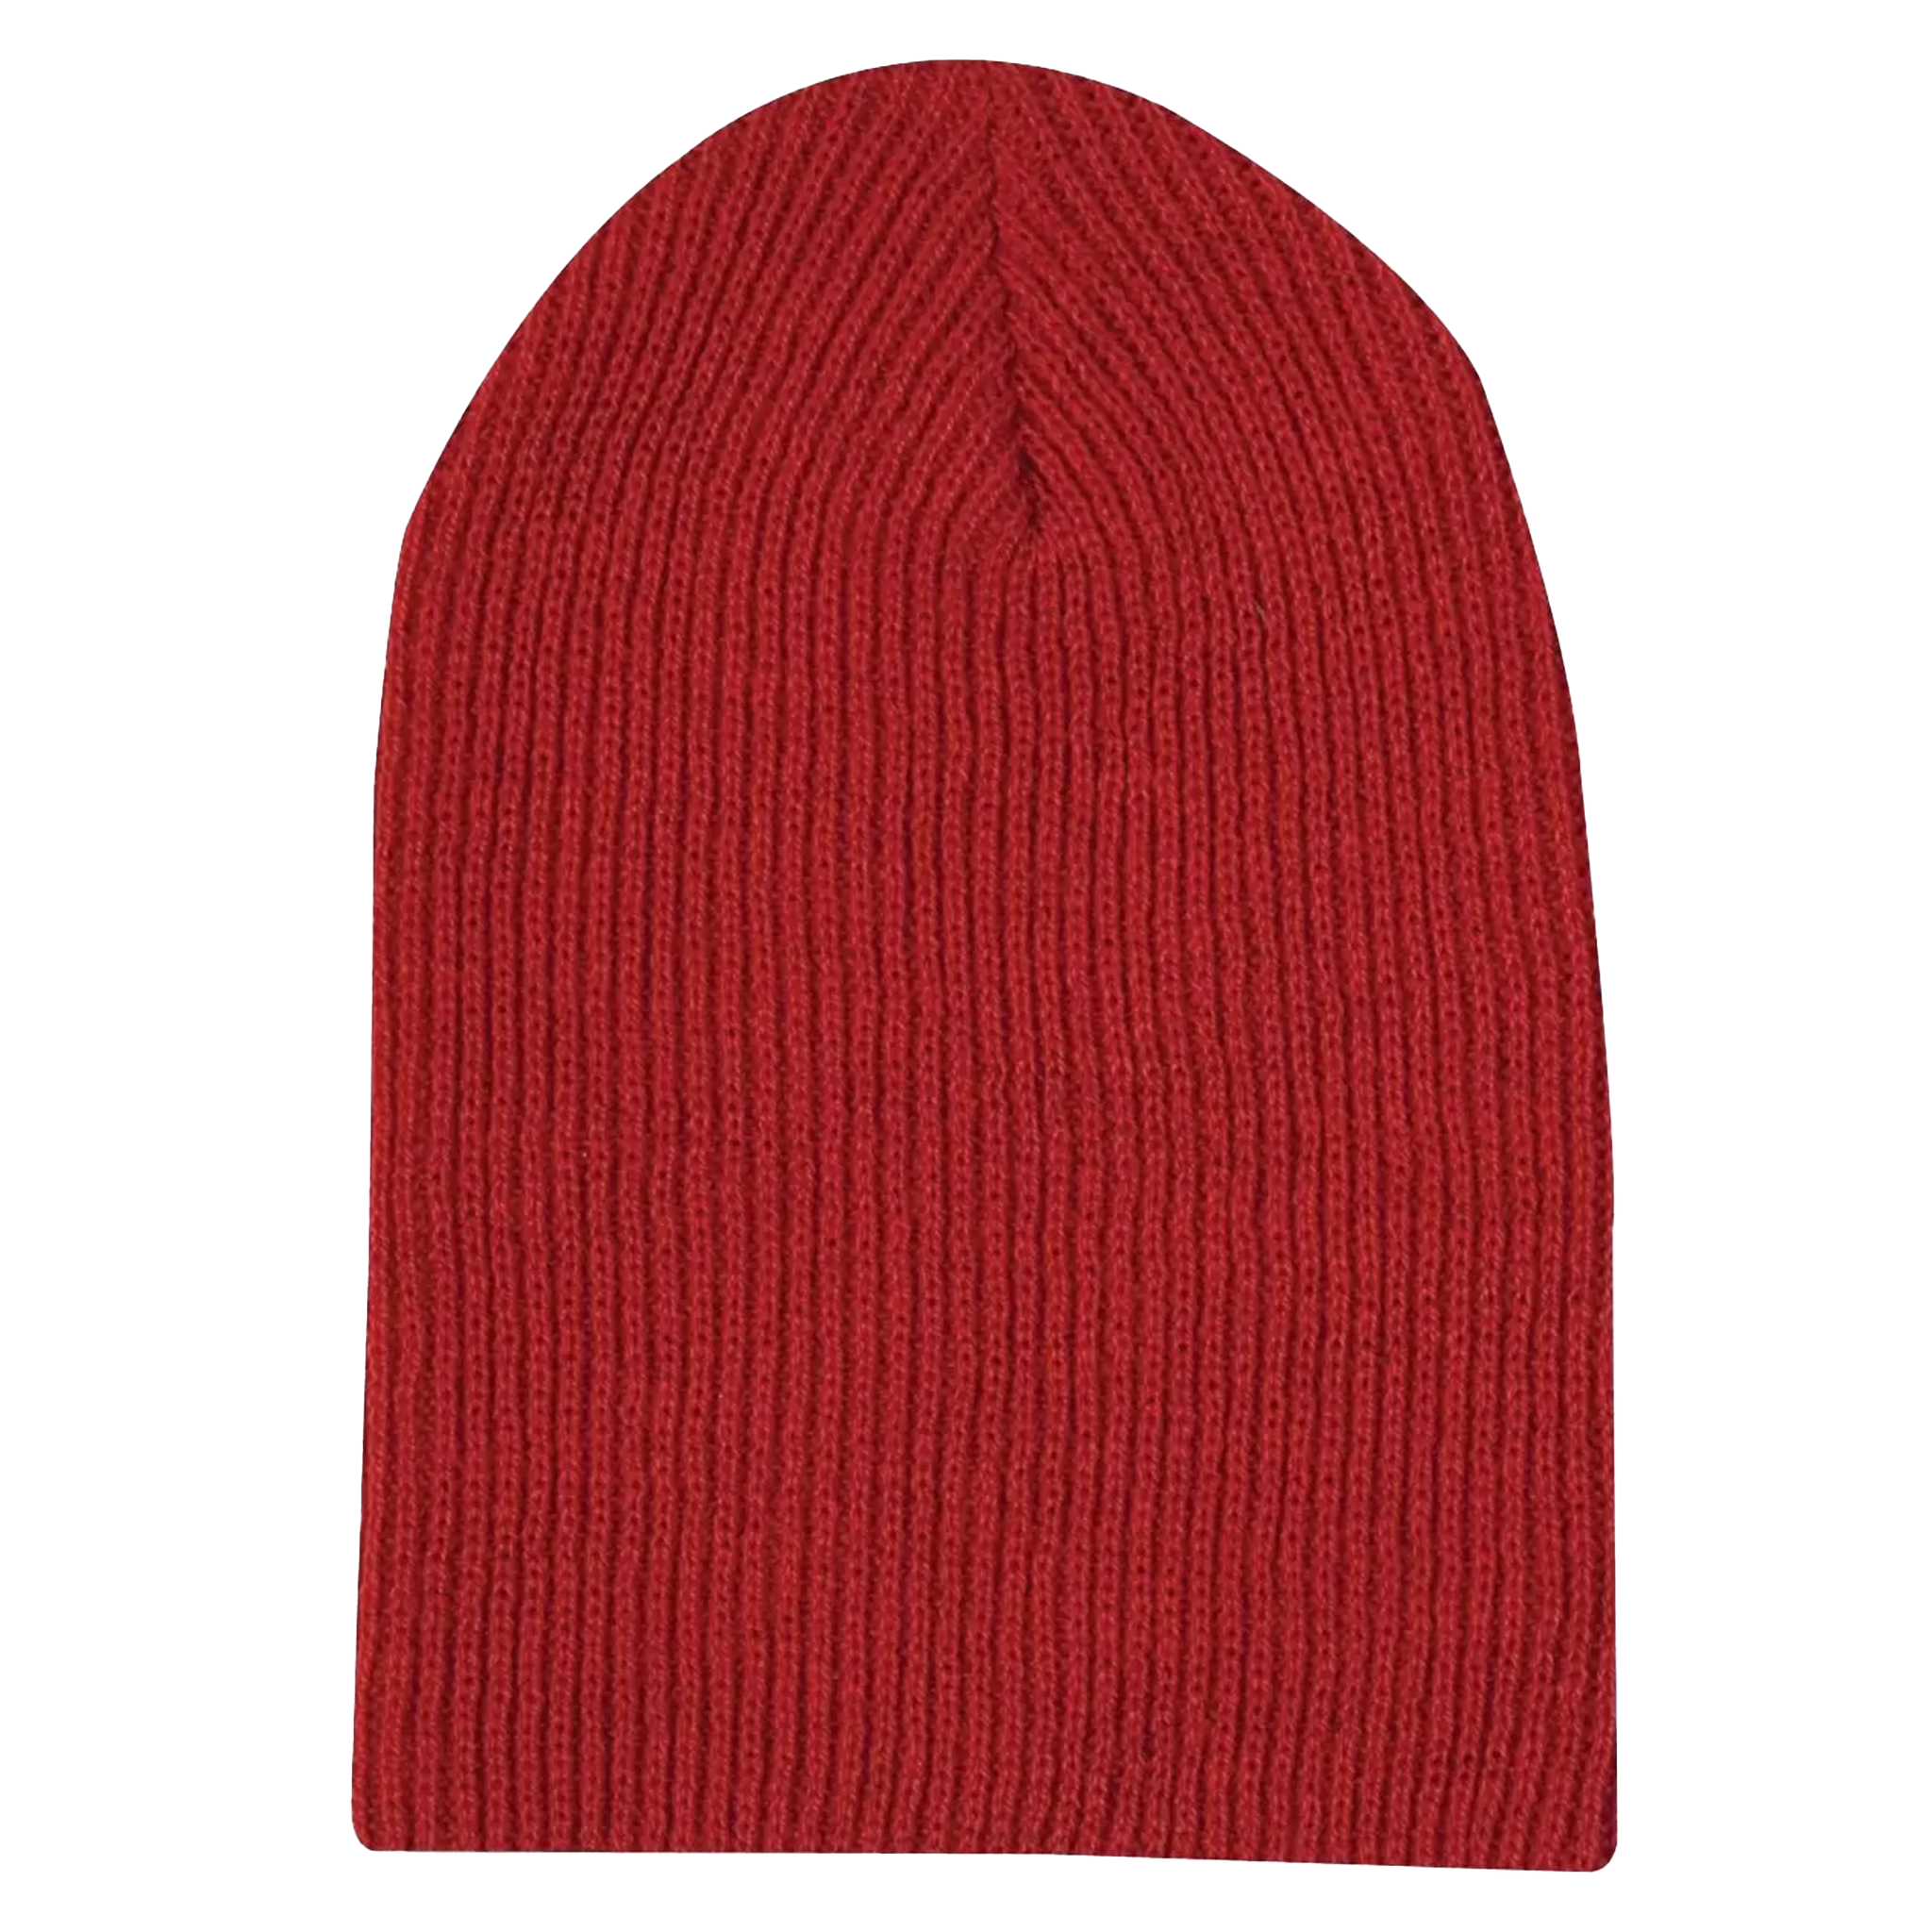 ATC Everyday Rib Knit Slouch Beanie - Adult Unisex One Size Fits All - Red